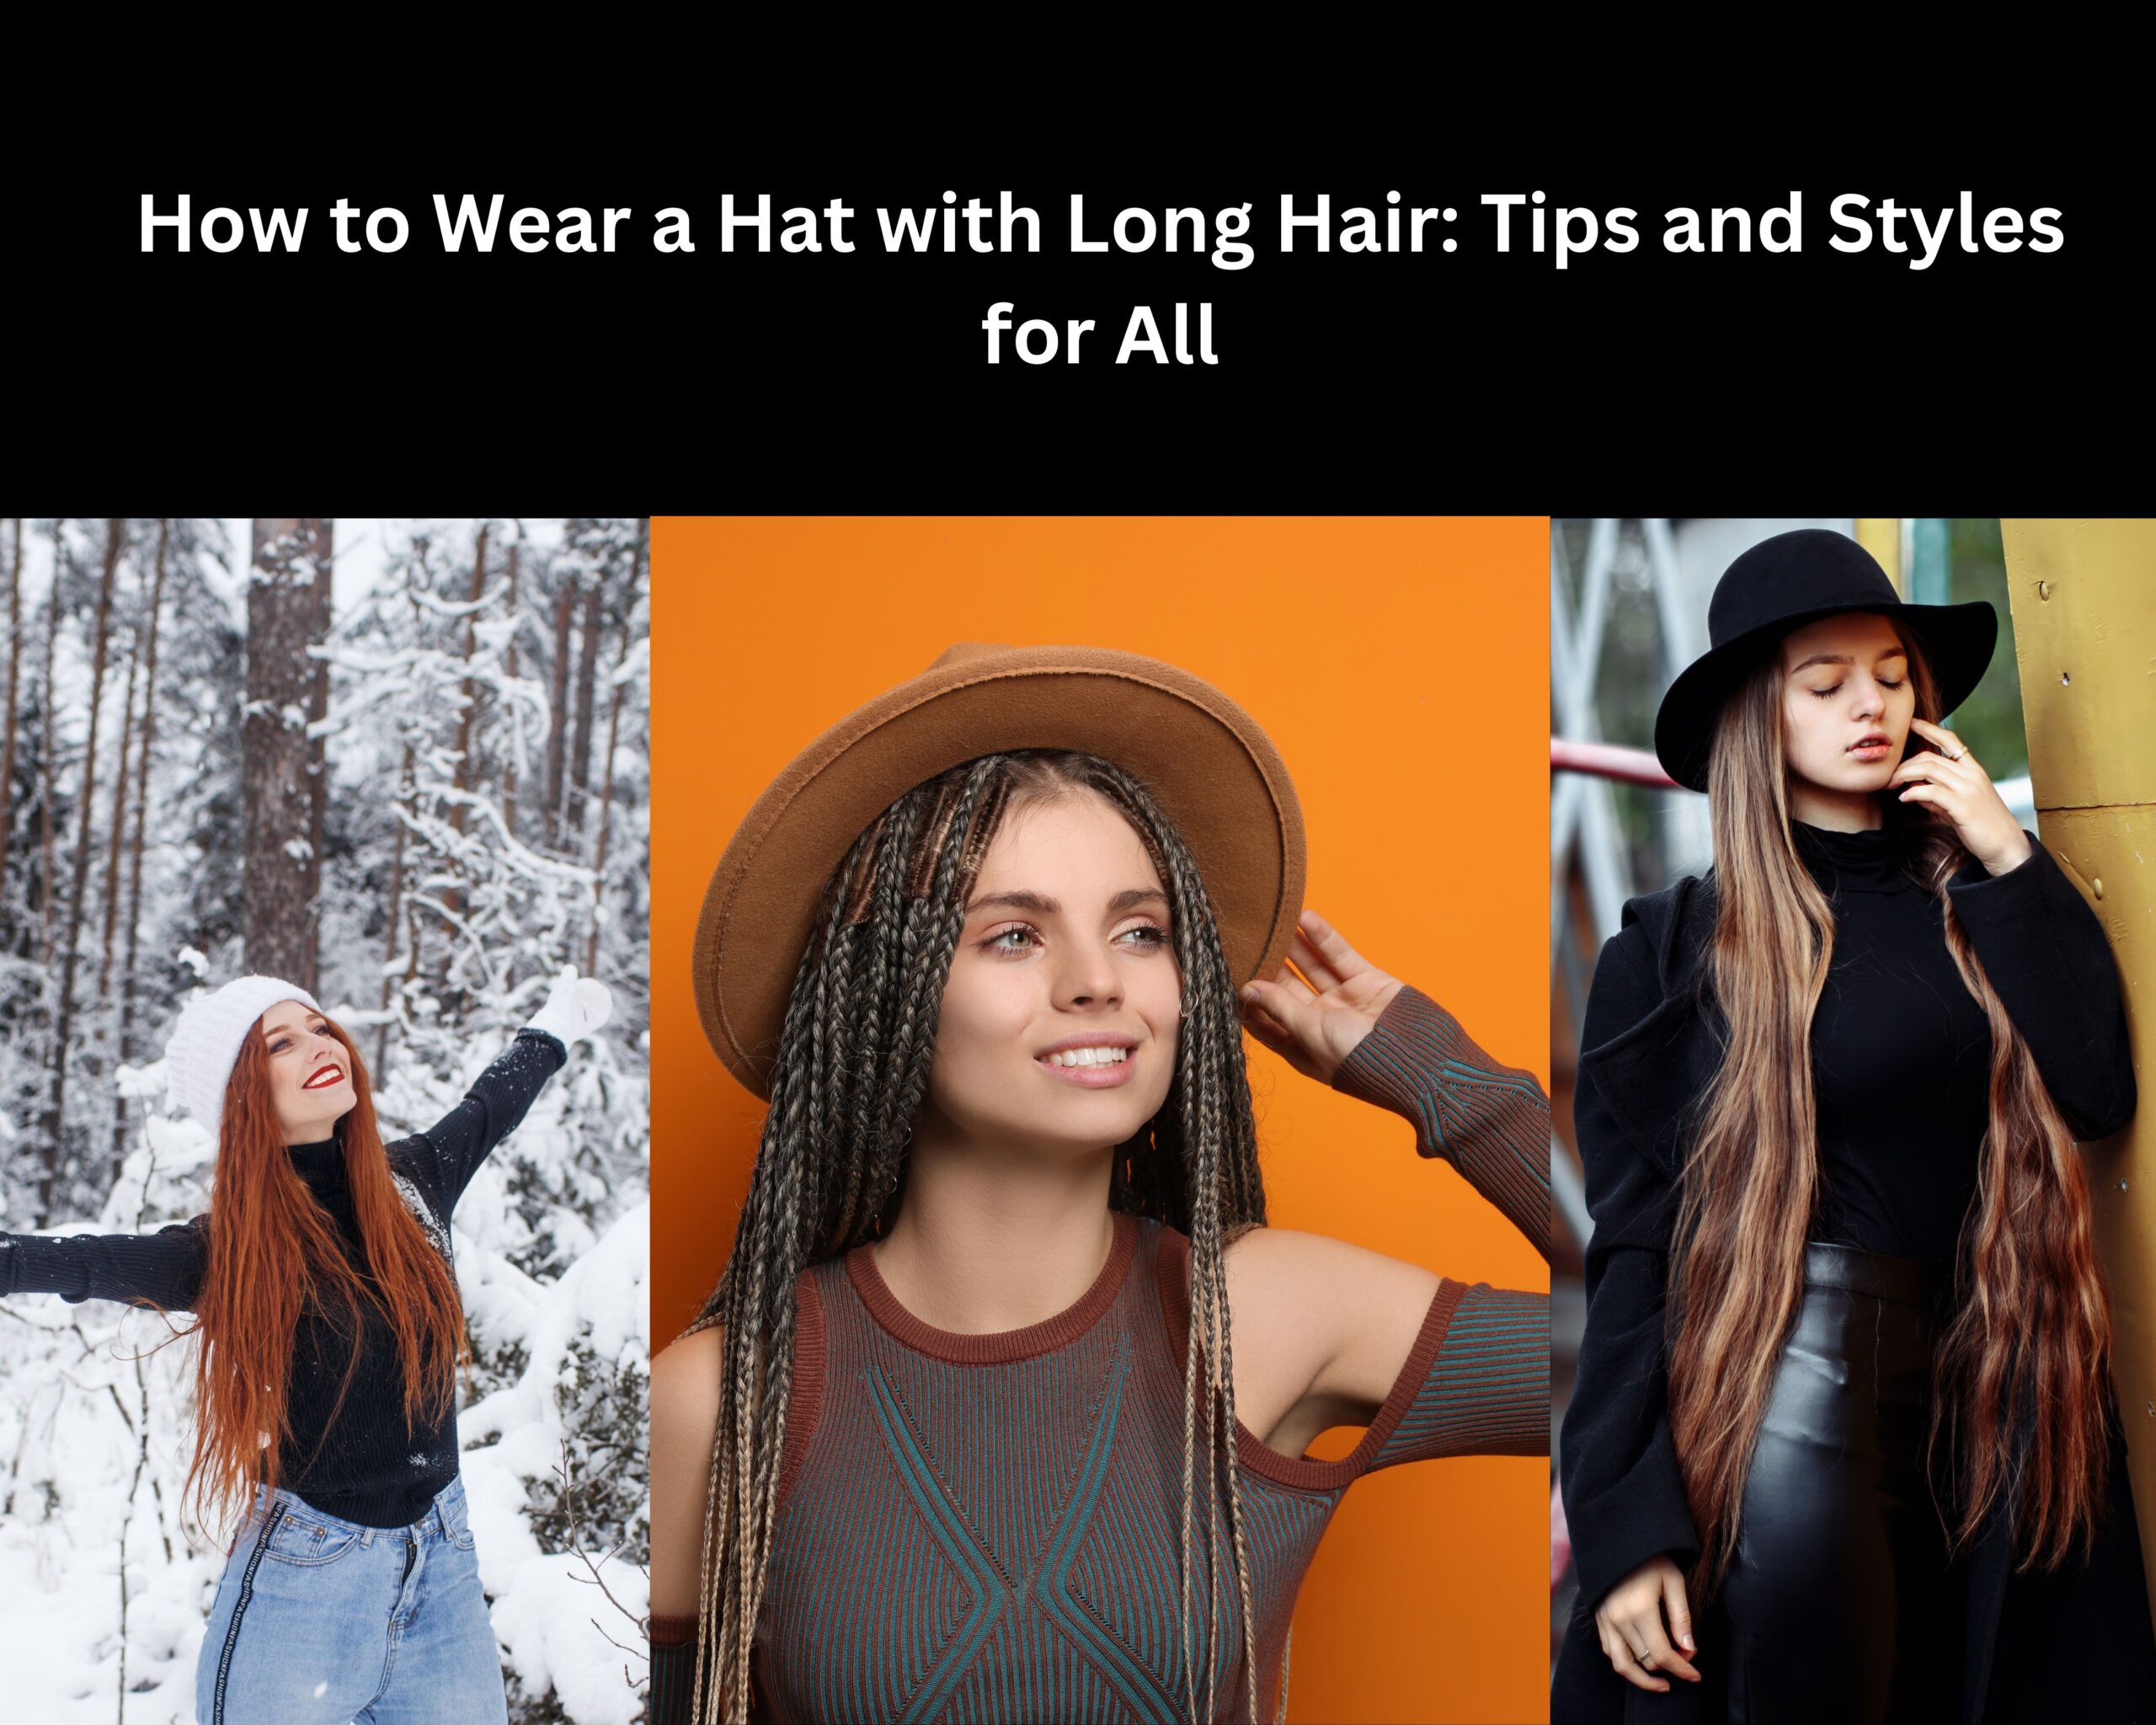 How to Wear a Hat with Long Hair